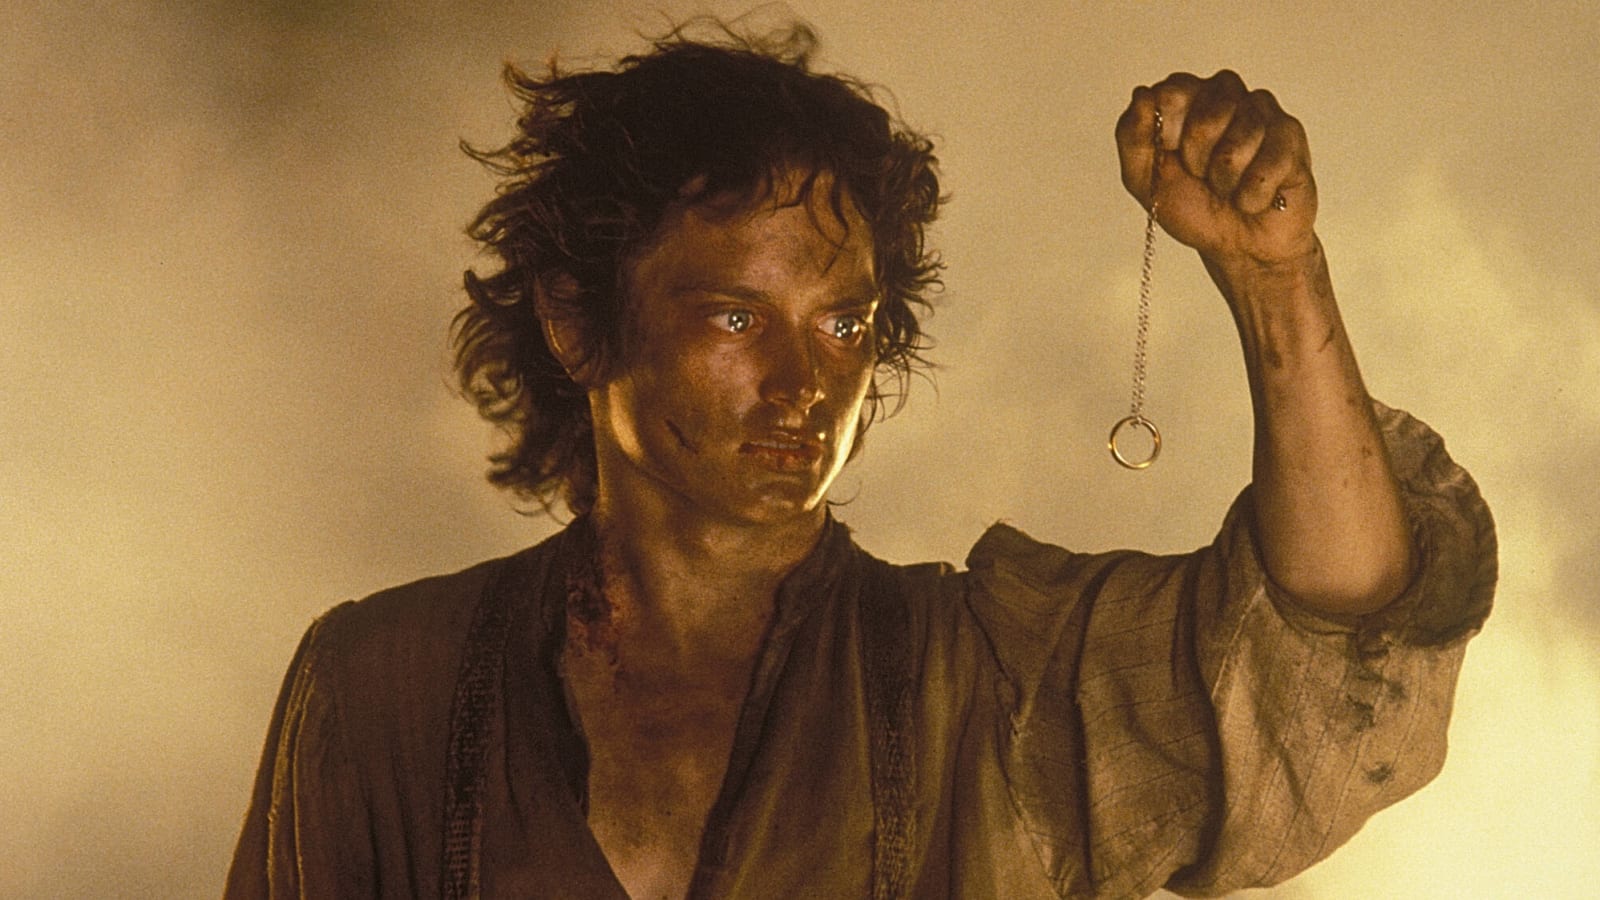 20 facts you might not know about 'Lord of the Rings: Return of the King'